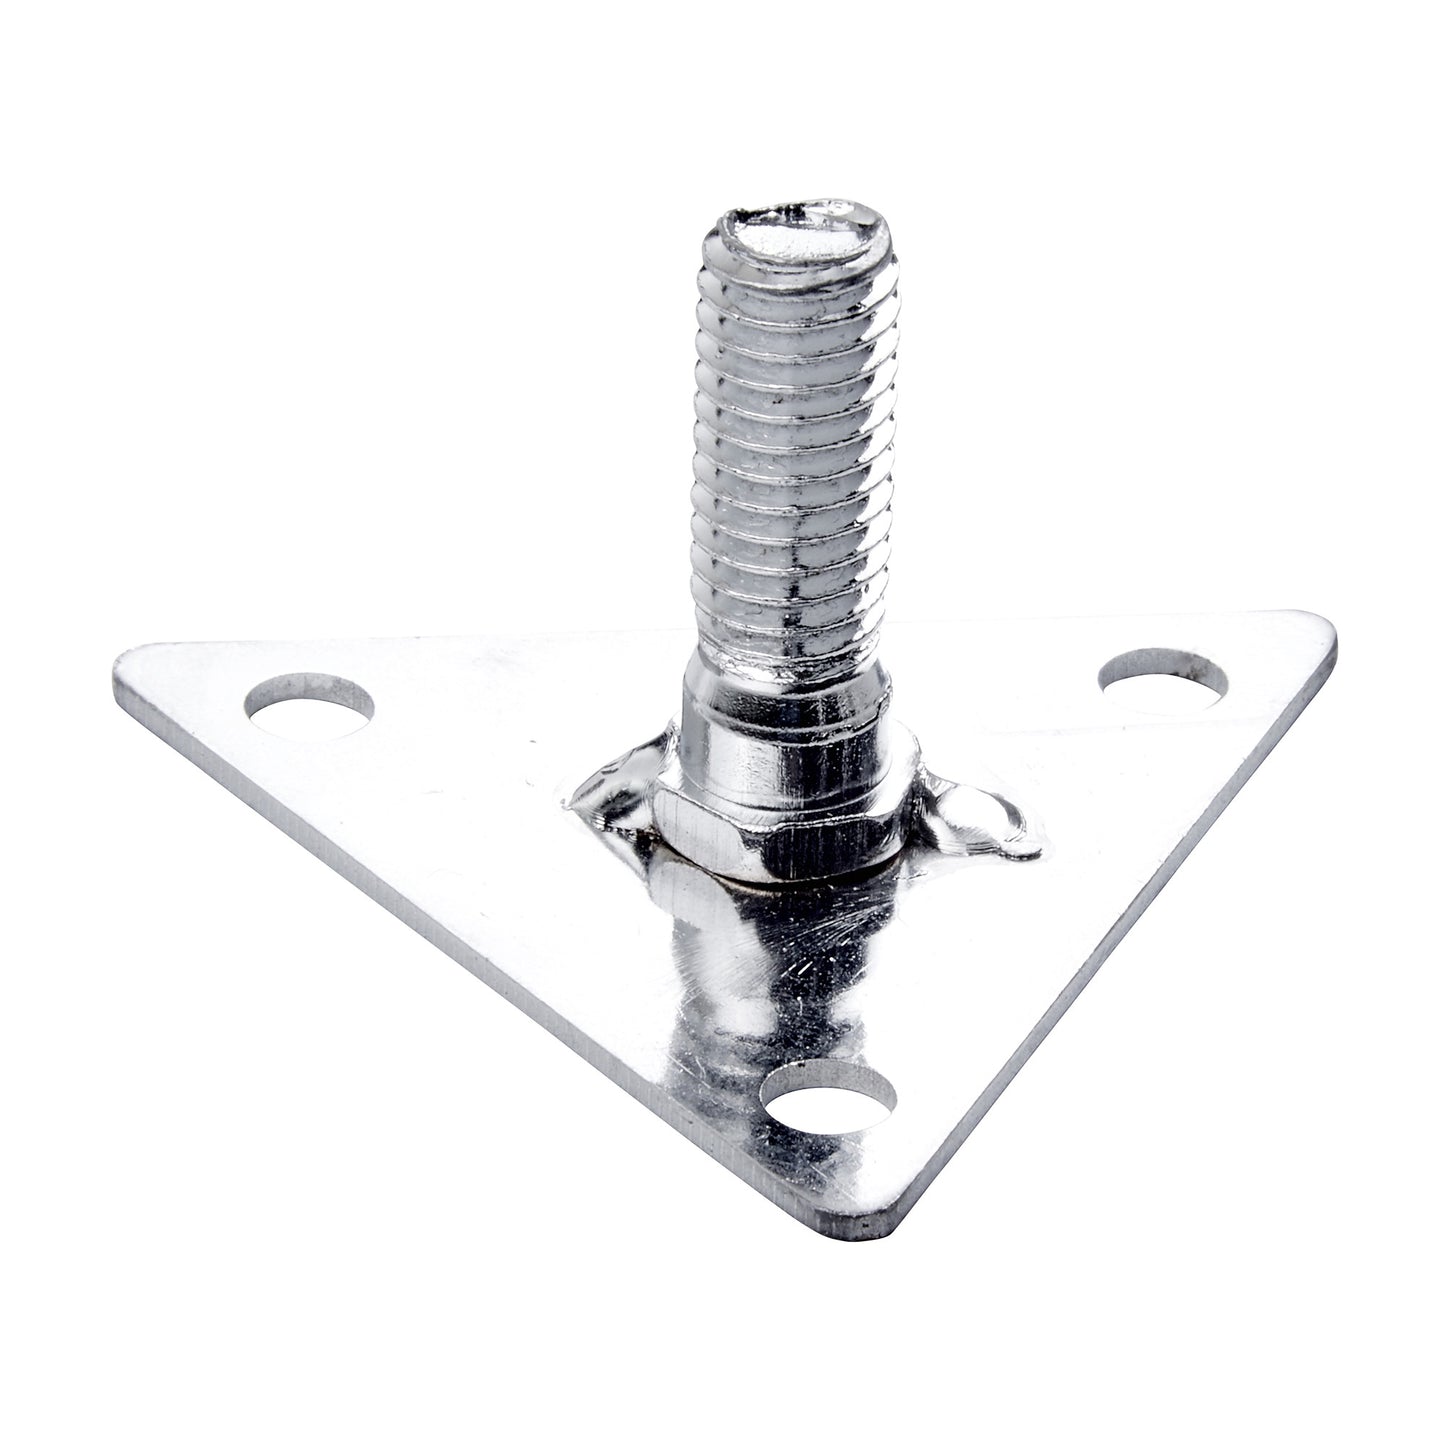 VC-FP - Shelving Foot Plate with Screws, 4-Set Pack